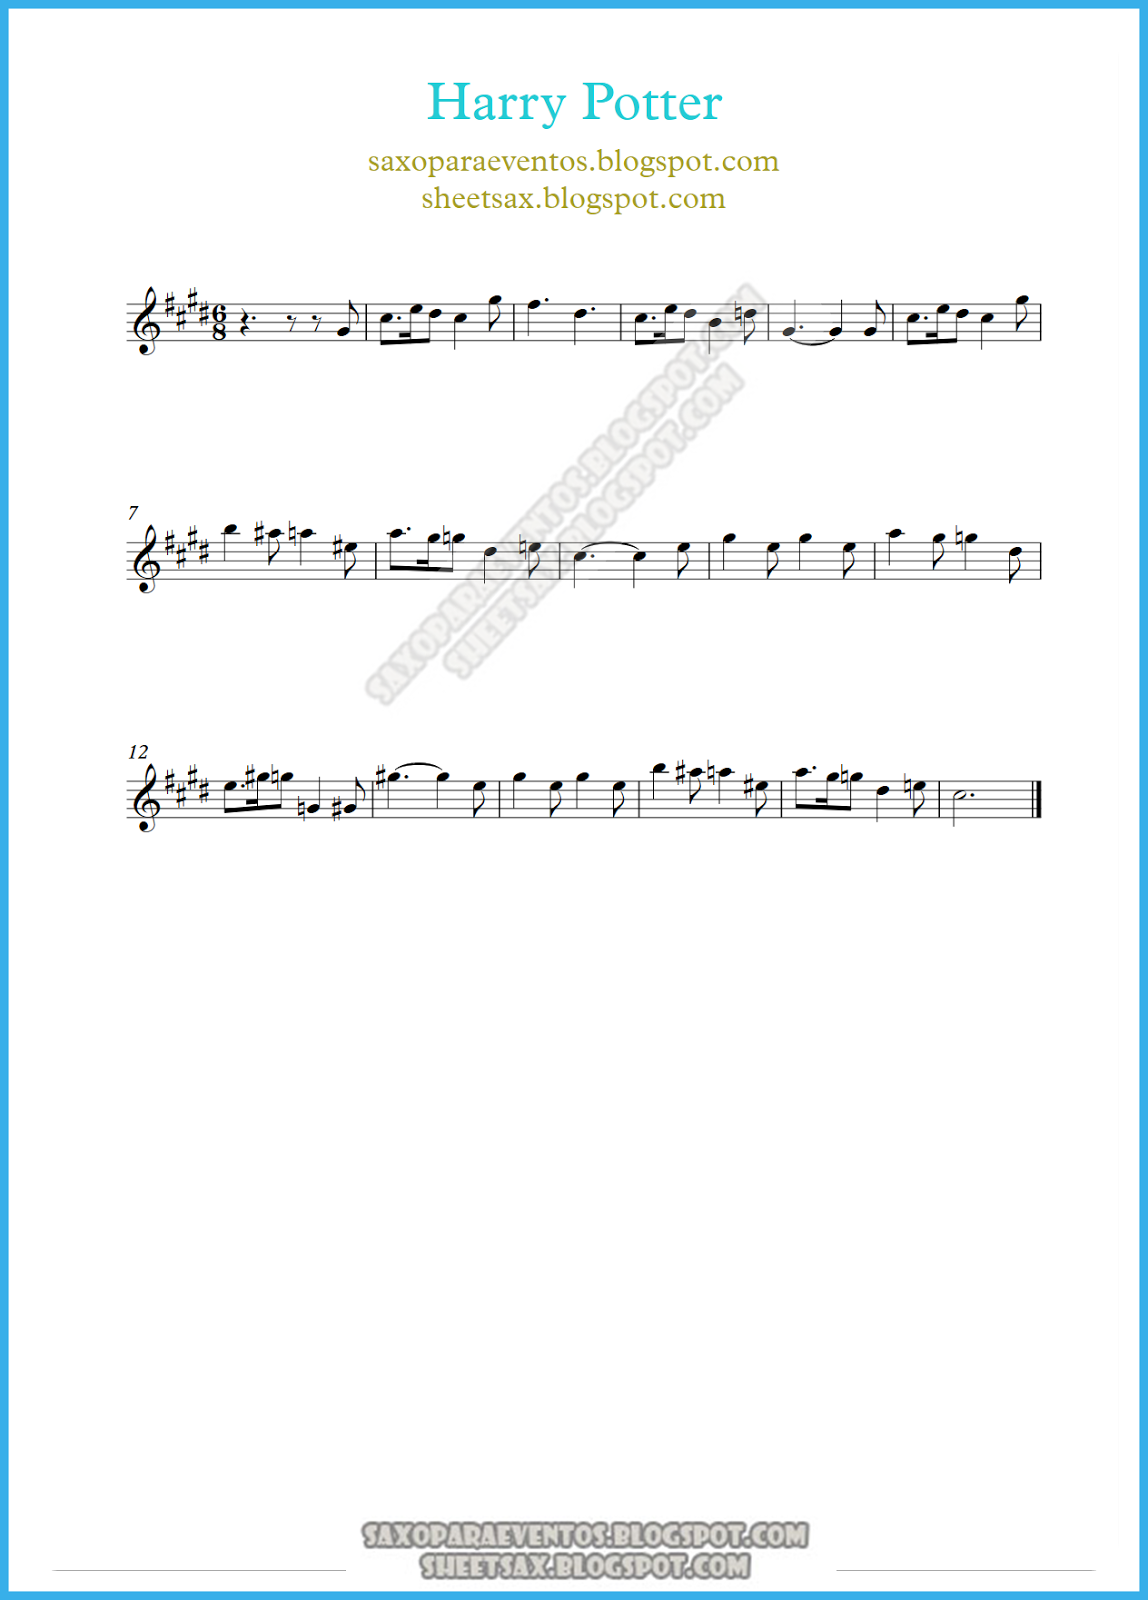 music-score-of-harry-potter-theme-free-sheet-music-for-sax